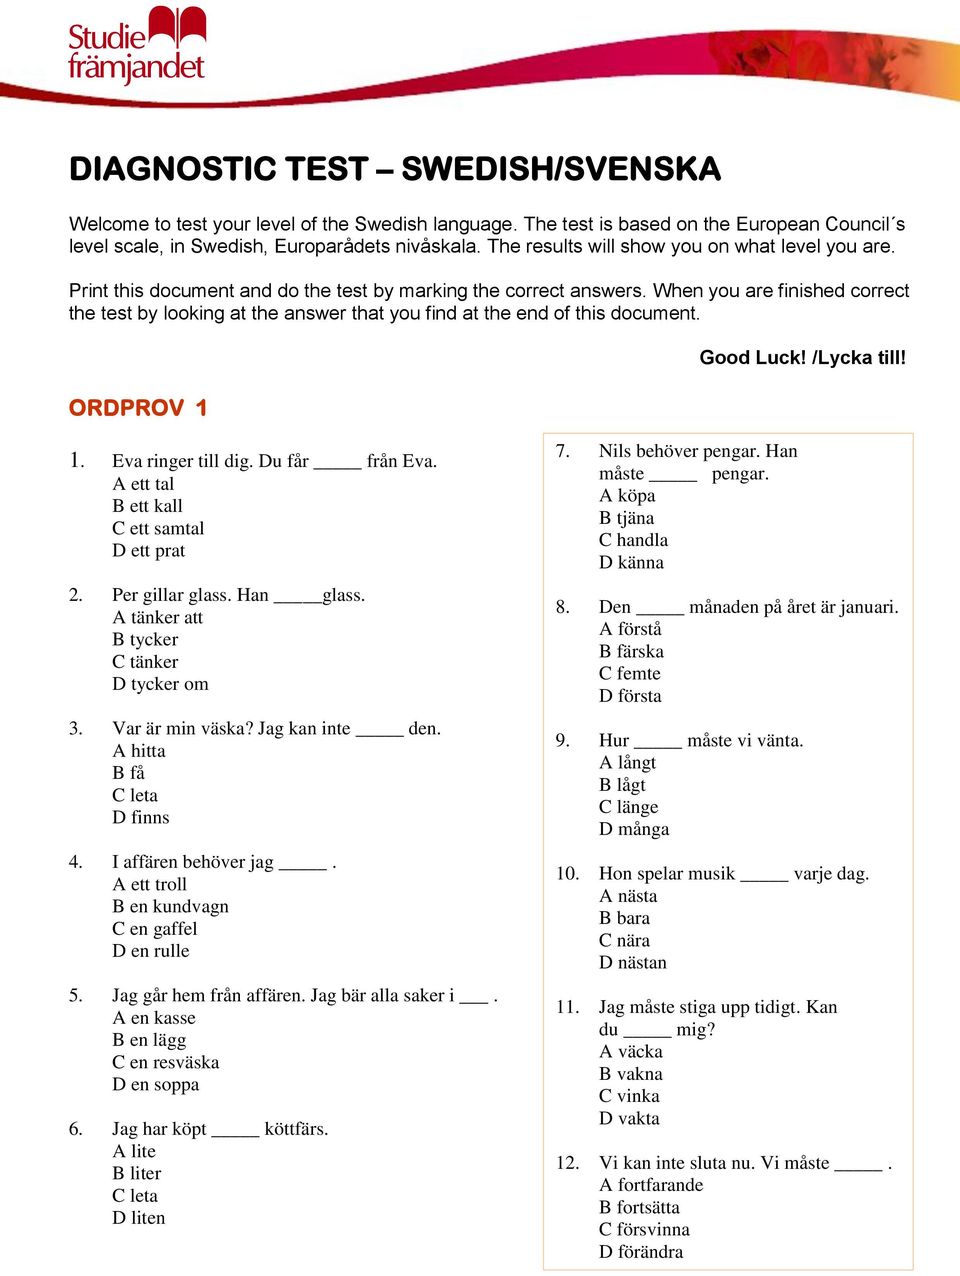 When you are finished correct the test by looking at the answer that you find at the end of this document. ORDPROV 1 Good Luck! /Lycka till! 1. Eva ringer till dig. Du får från Eva.